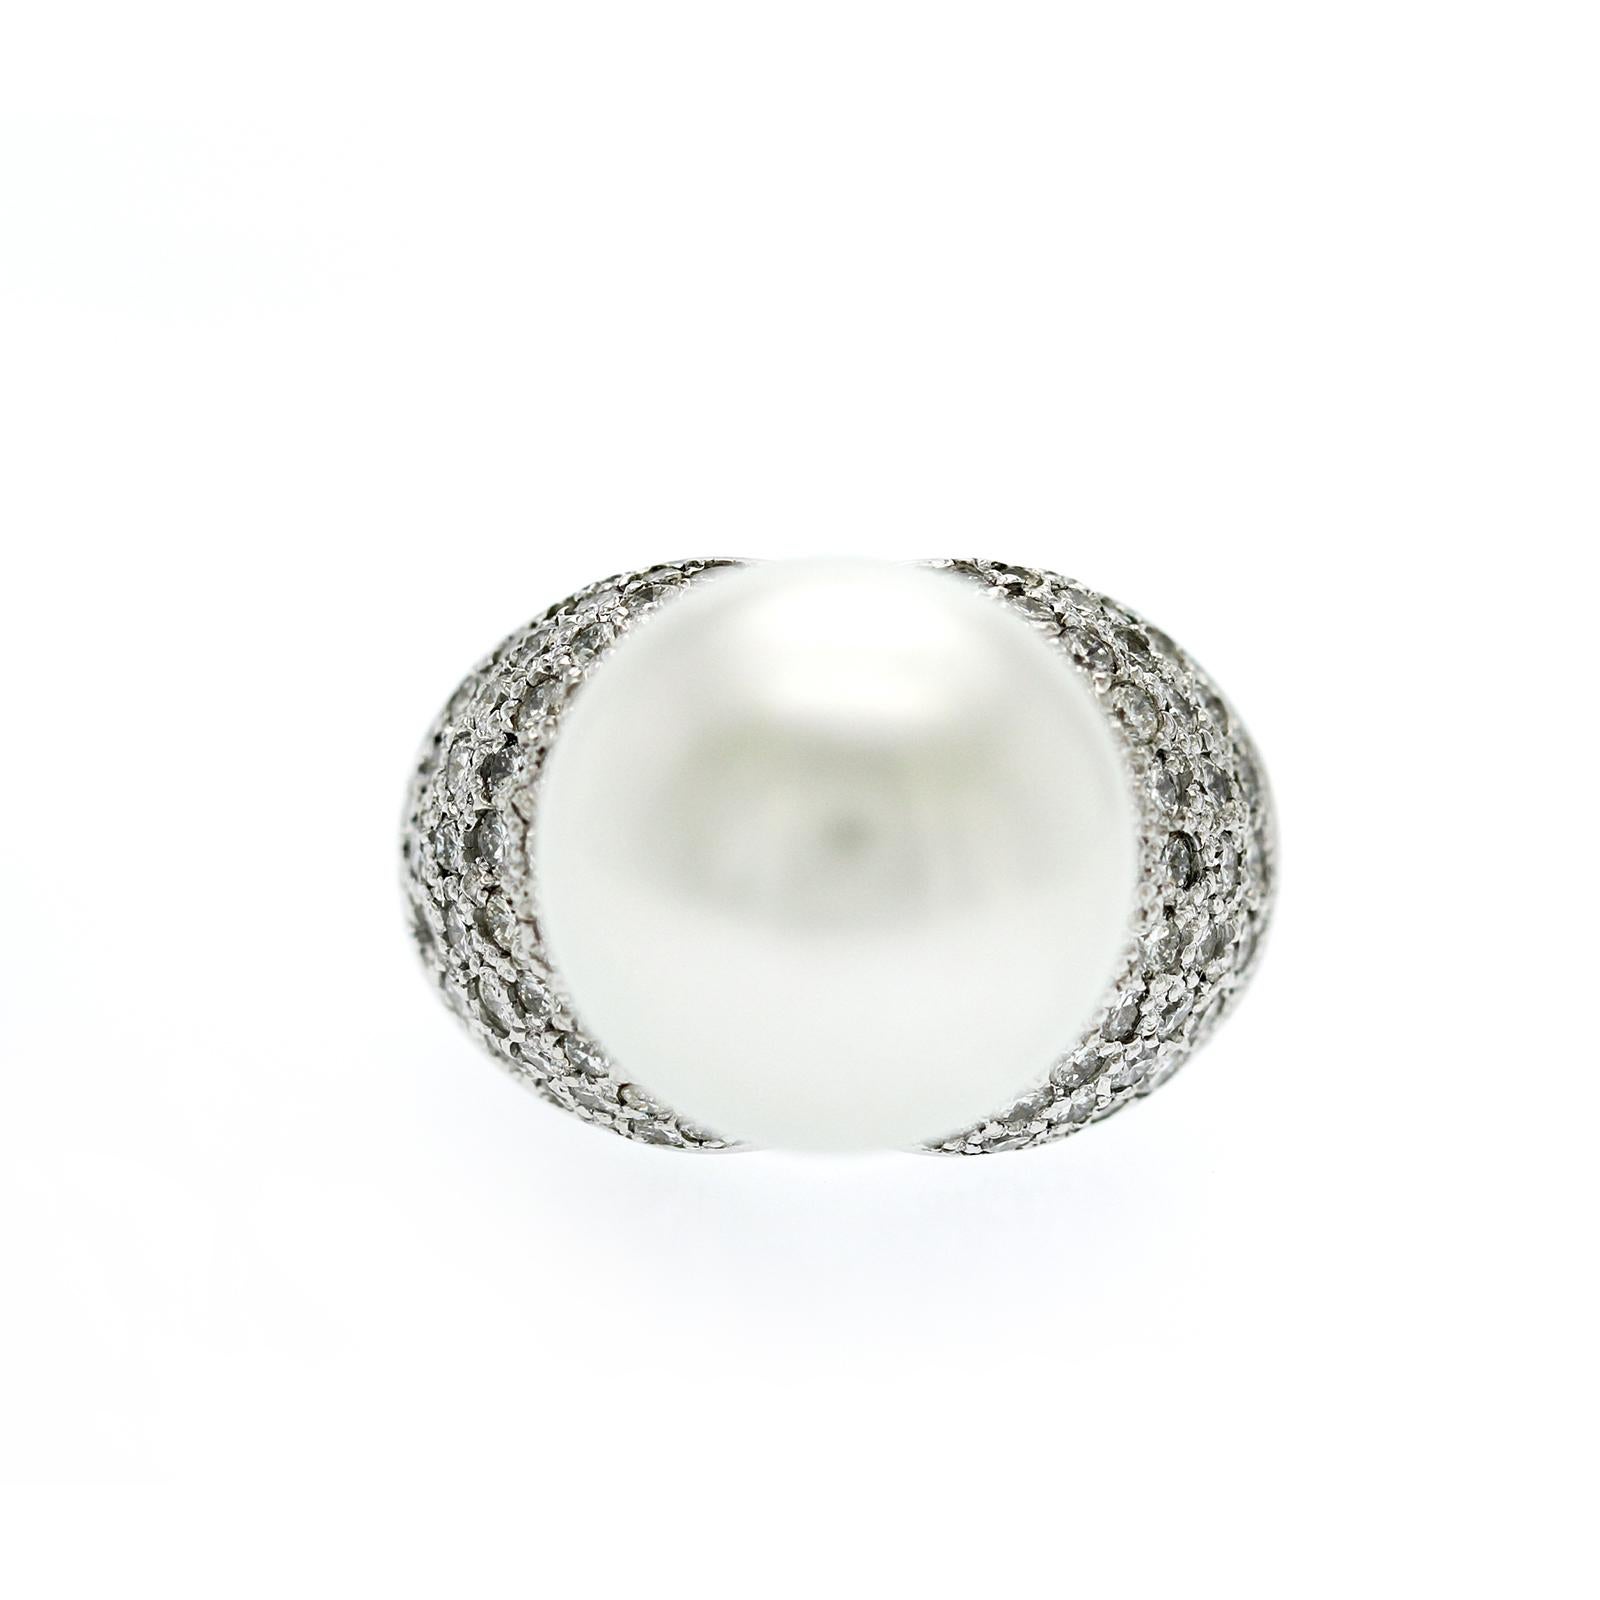 100% Authentic, 100% Customer Satisfaction
Height: 15.5 mm
Width: 4.5 mm
Size:  6 ( Contact Us for Sizing)
Metal:14K White Gold
Hallmarks: 14K
Total Weight: 16.6 Grams
Stone Type: 15 mm South Sea Pearl & Approximately 1.10 CT Diamonds Color H-L